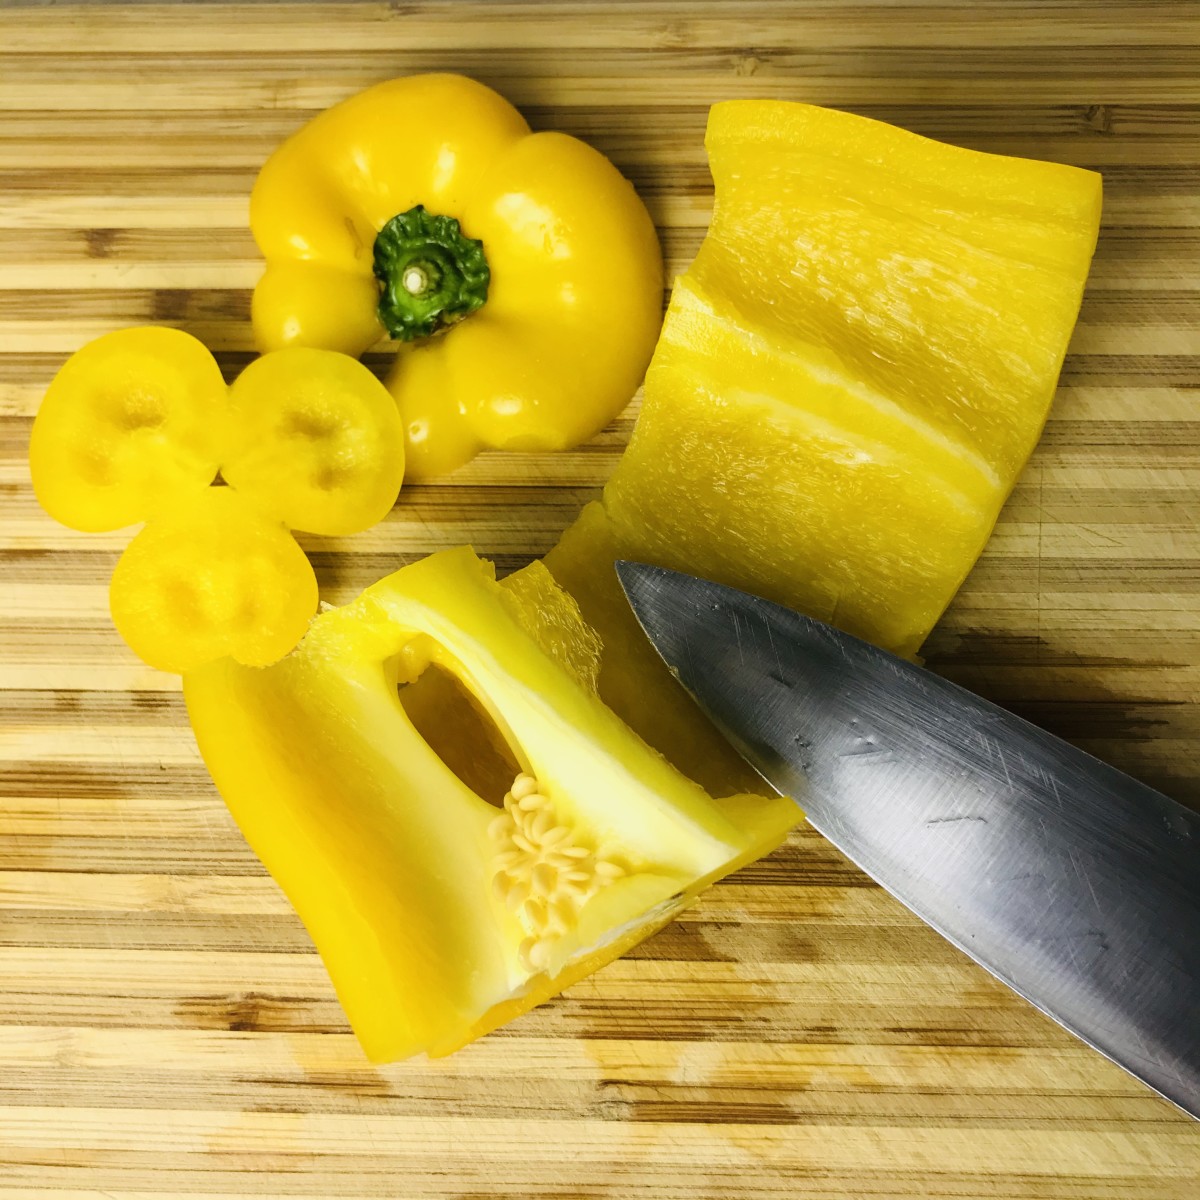 Begin by slicing the top and the bottom off of the pepper. Then, slice through the side, and run your knife along the inside and around the core to remove all the seeds and ribs intact. Thinly slice the pepper, including the top and bottom pieces.